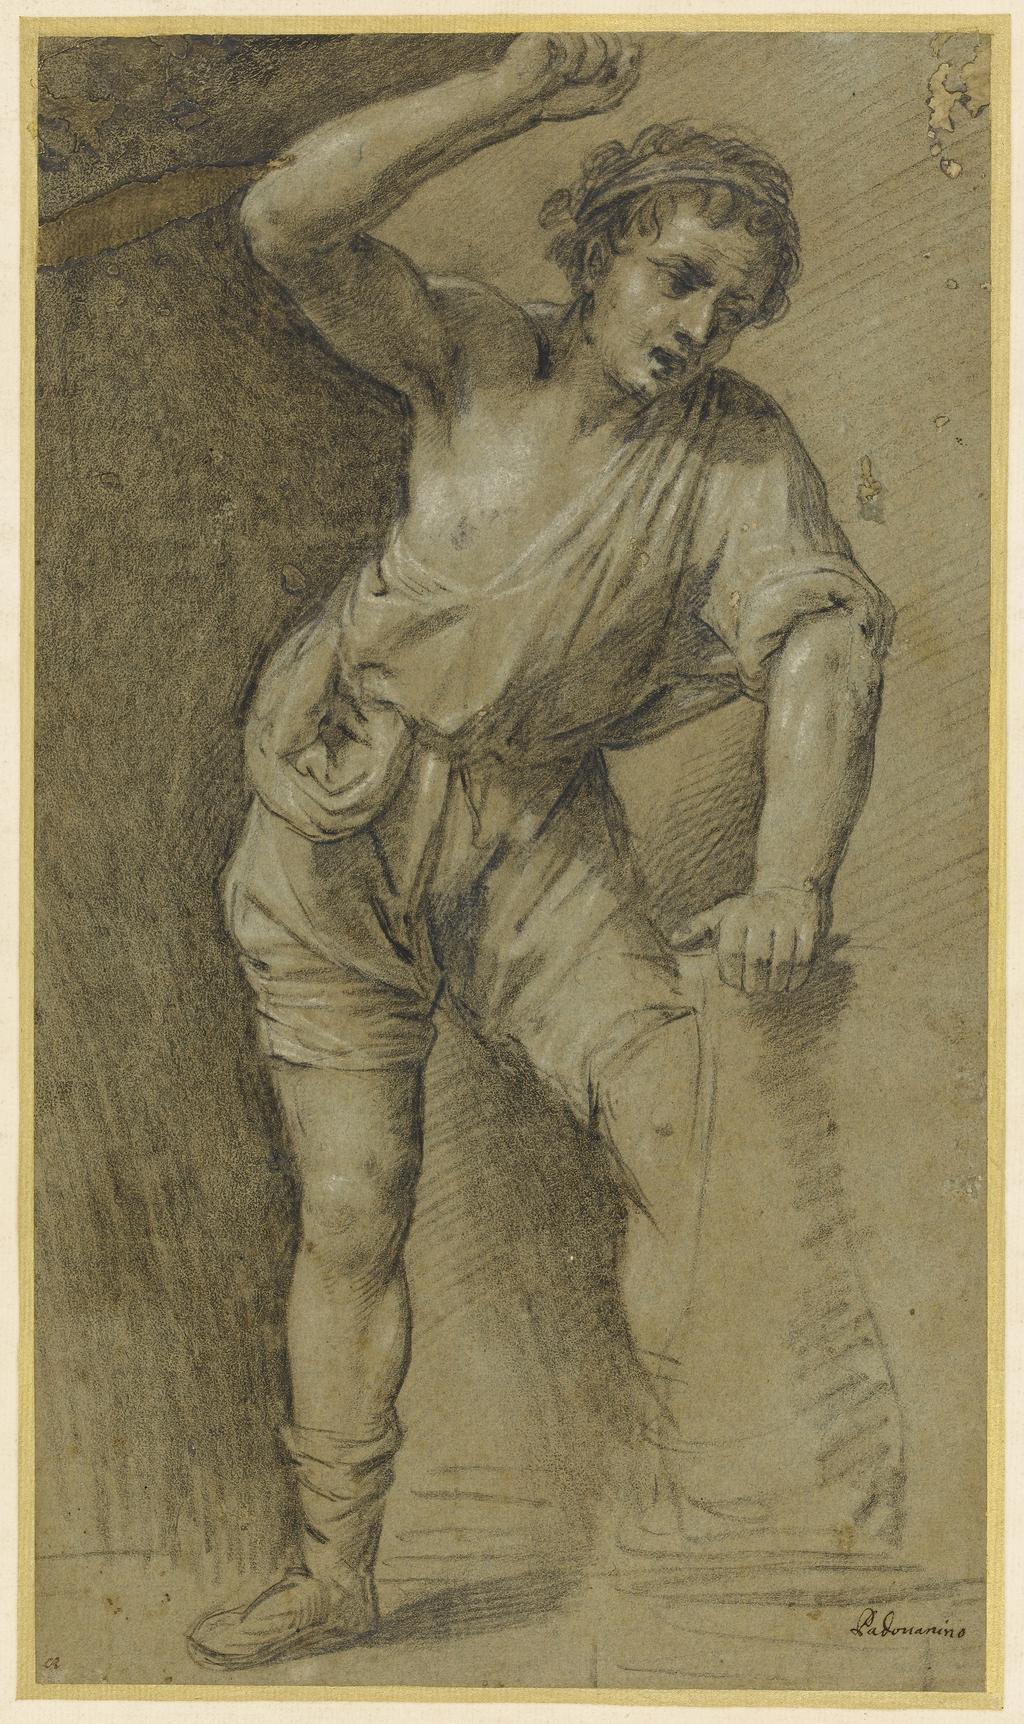 An image of Title/s: Study of a youth for a flagellation Maker/s: Leoni, Ottavio Mario attributed to (draughtsman) [ULAN info: Italian artist c.1578-1630]Technique Description: black chalk heightened with white on discloured blue paper Dimensions: height: 389 mm, width: 224 mm